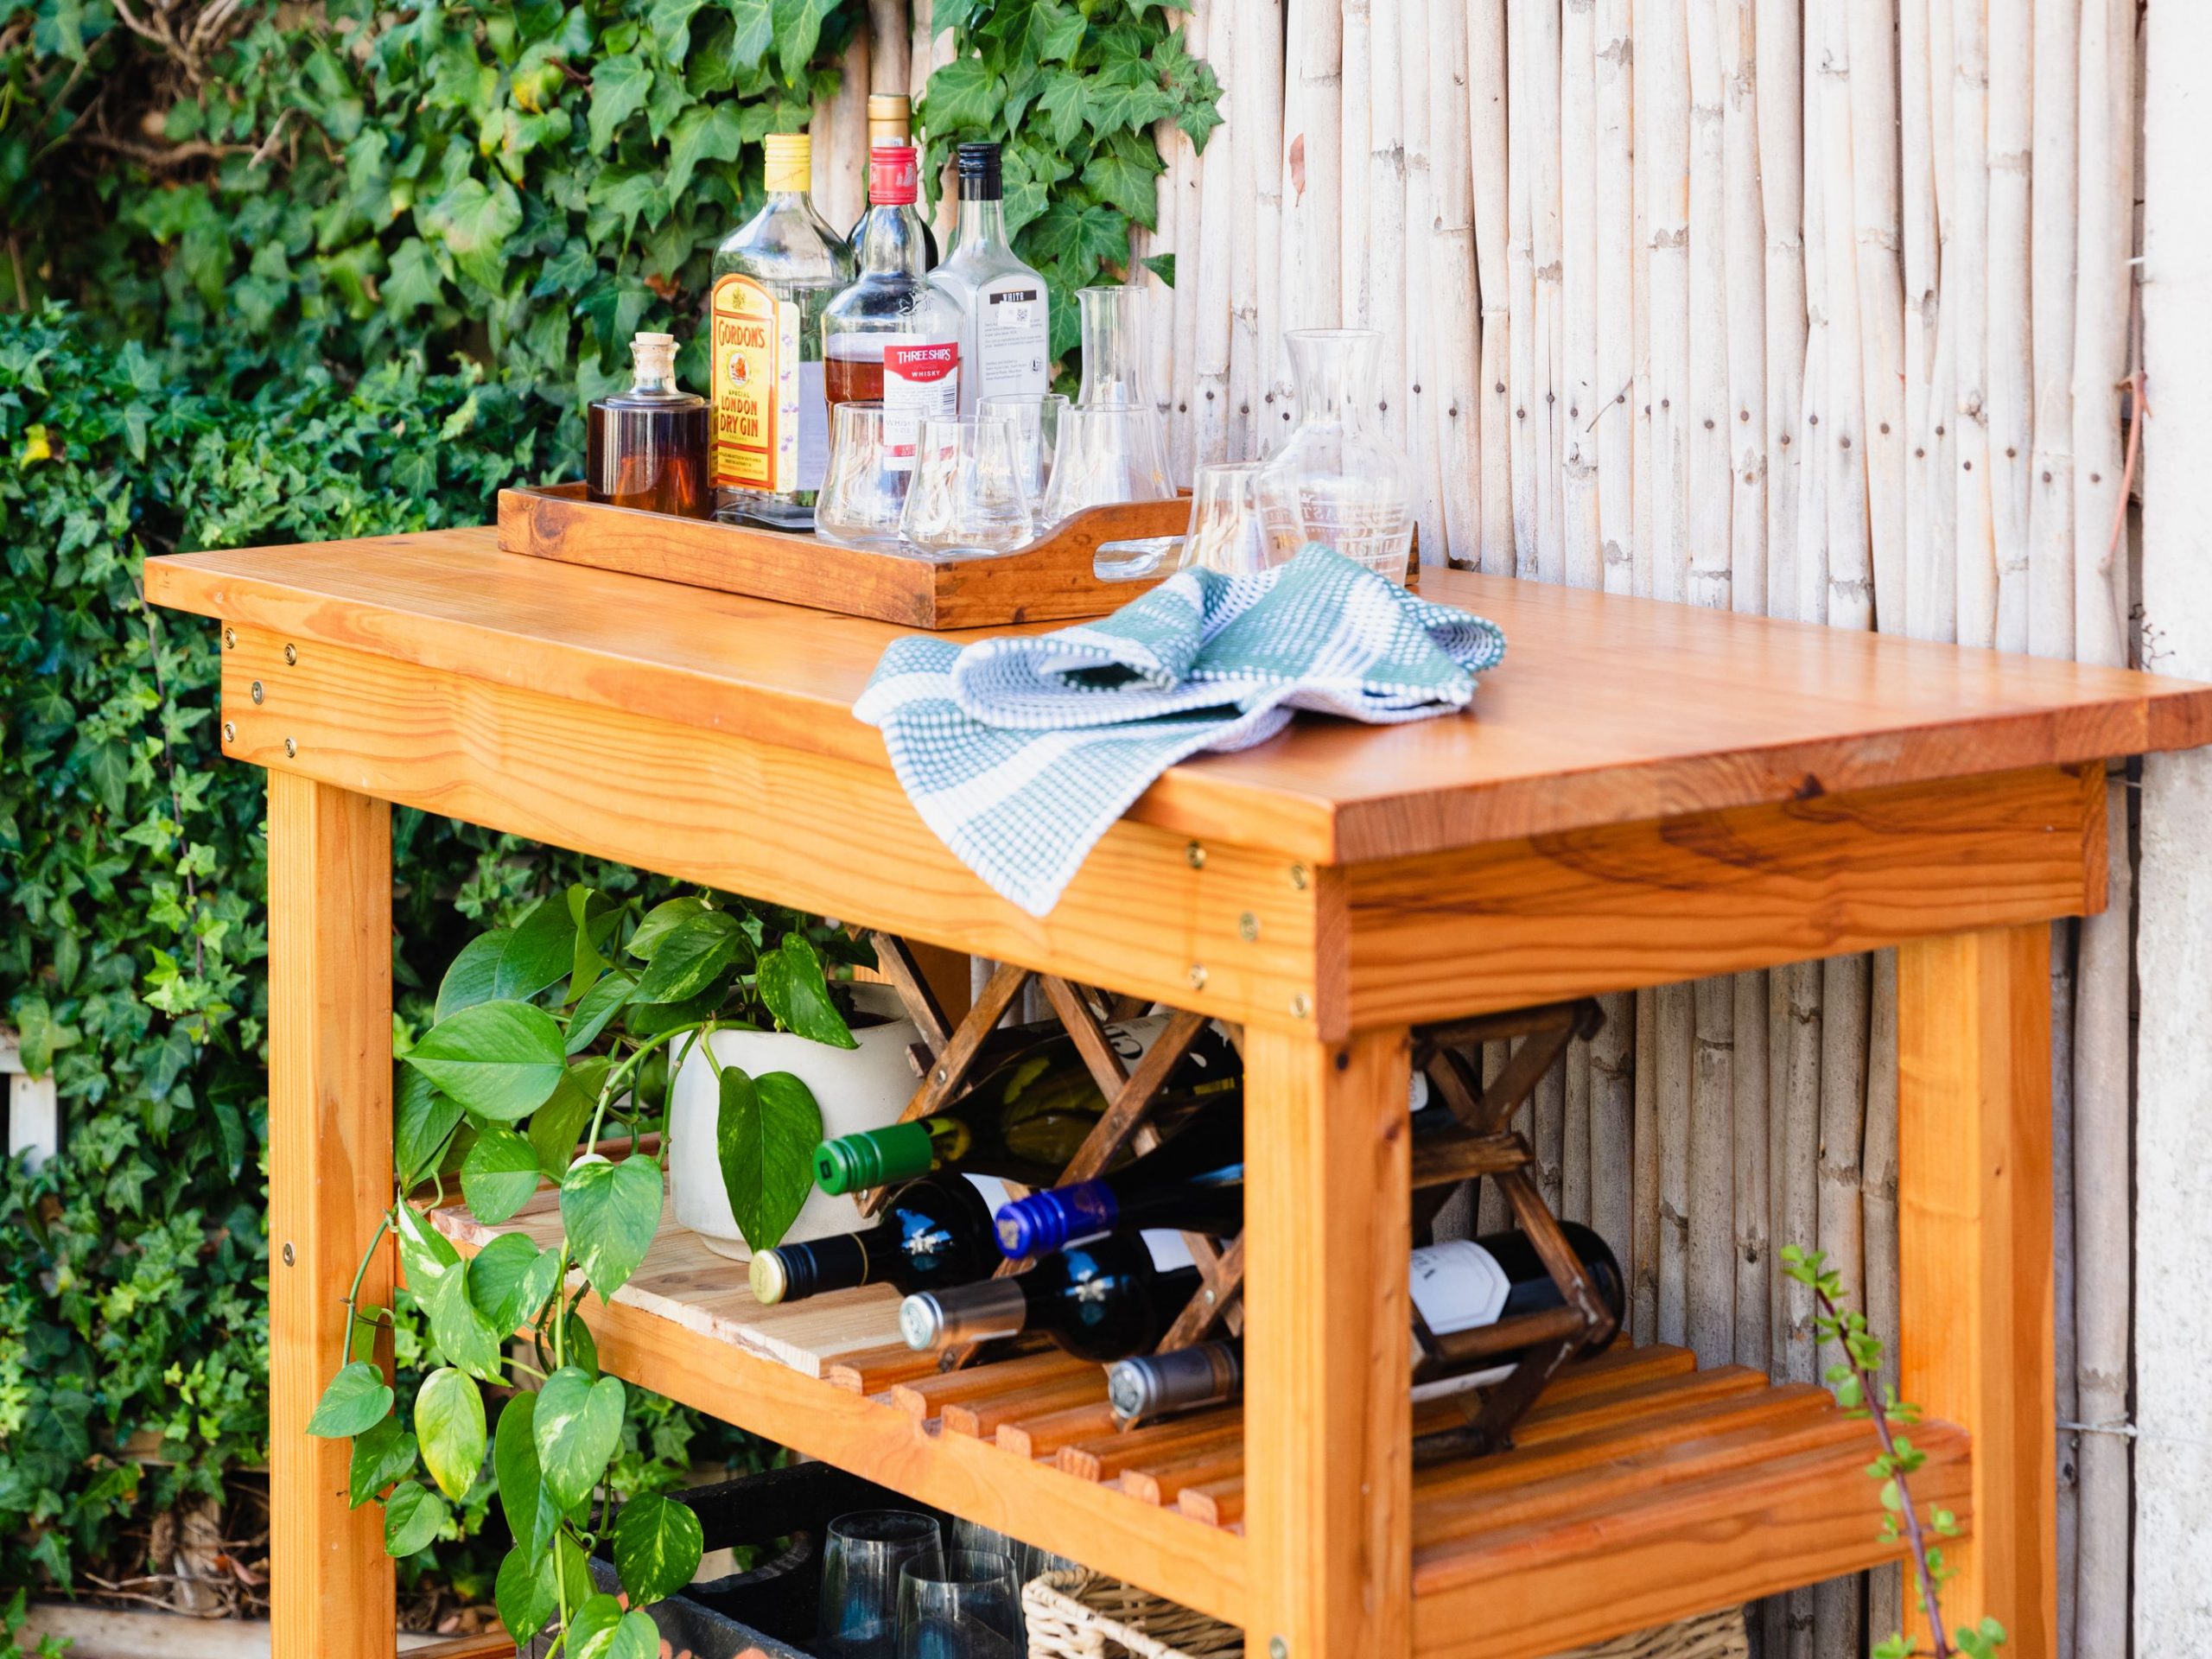 2-in-1 serving cart and garden table